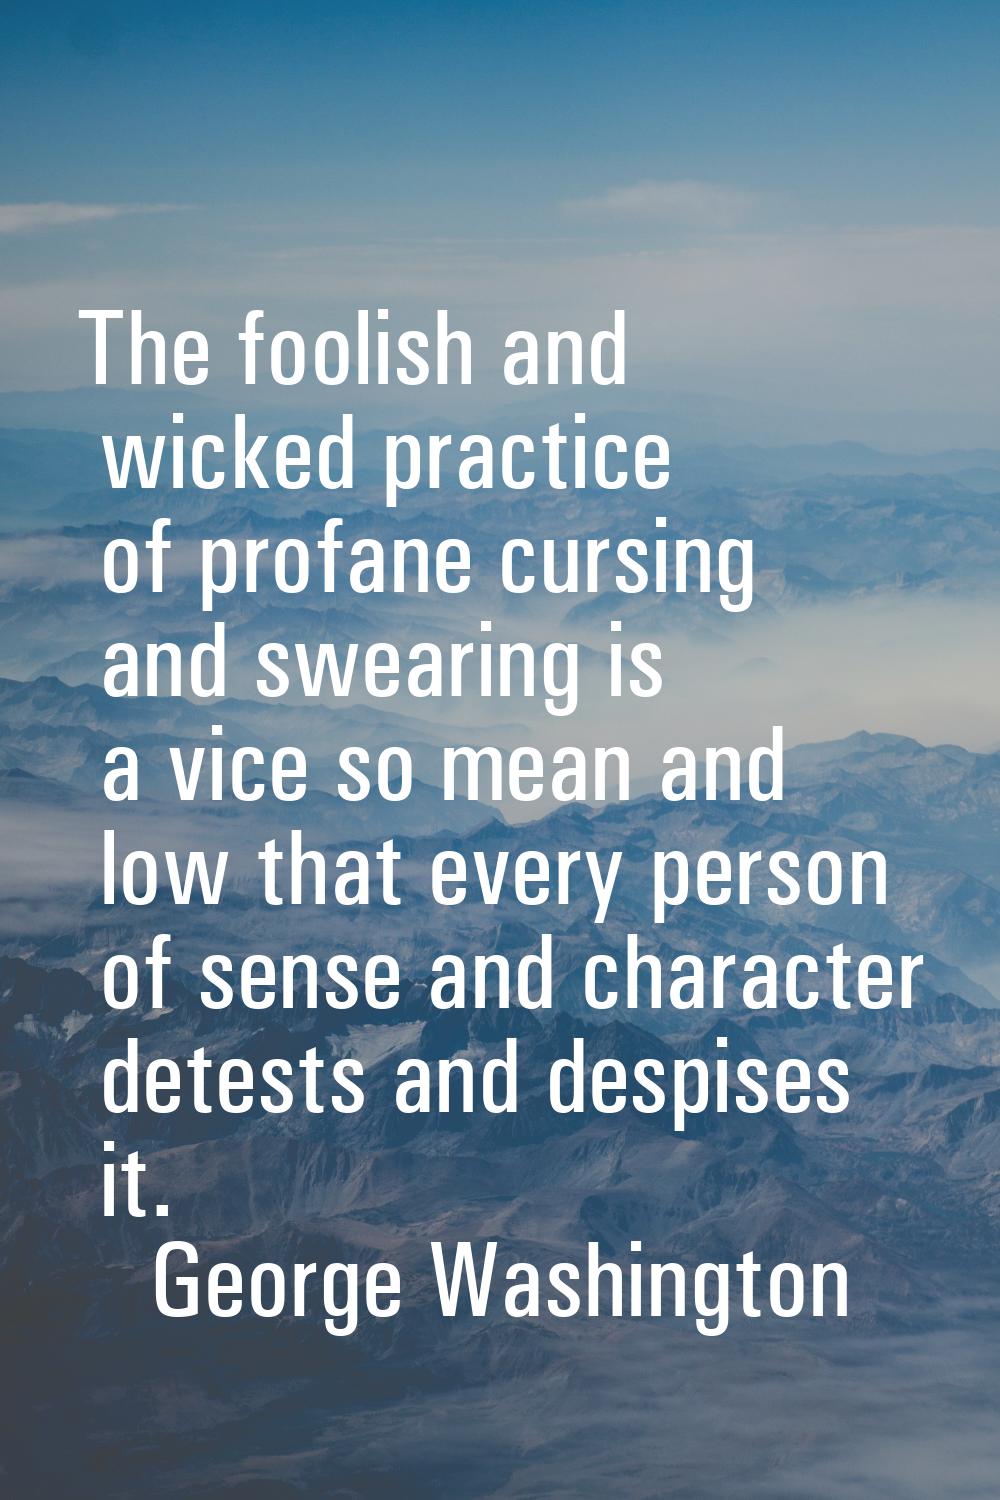 The foolish and wicked practice of profane cursing and swearing is a vice so mean and low that ever